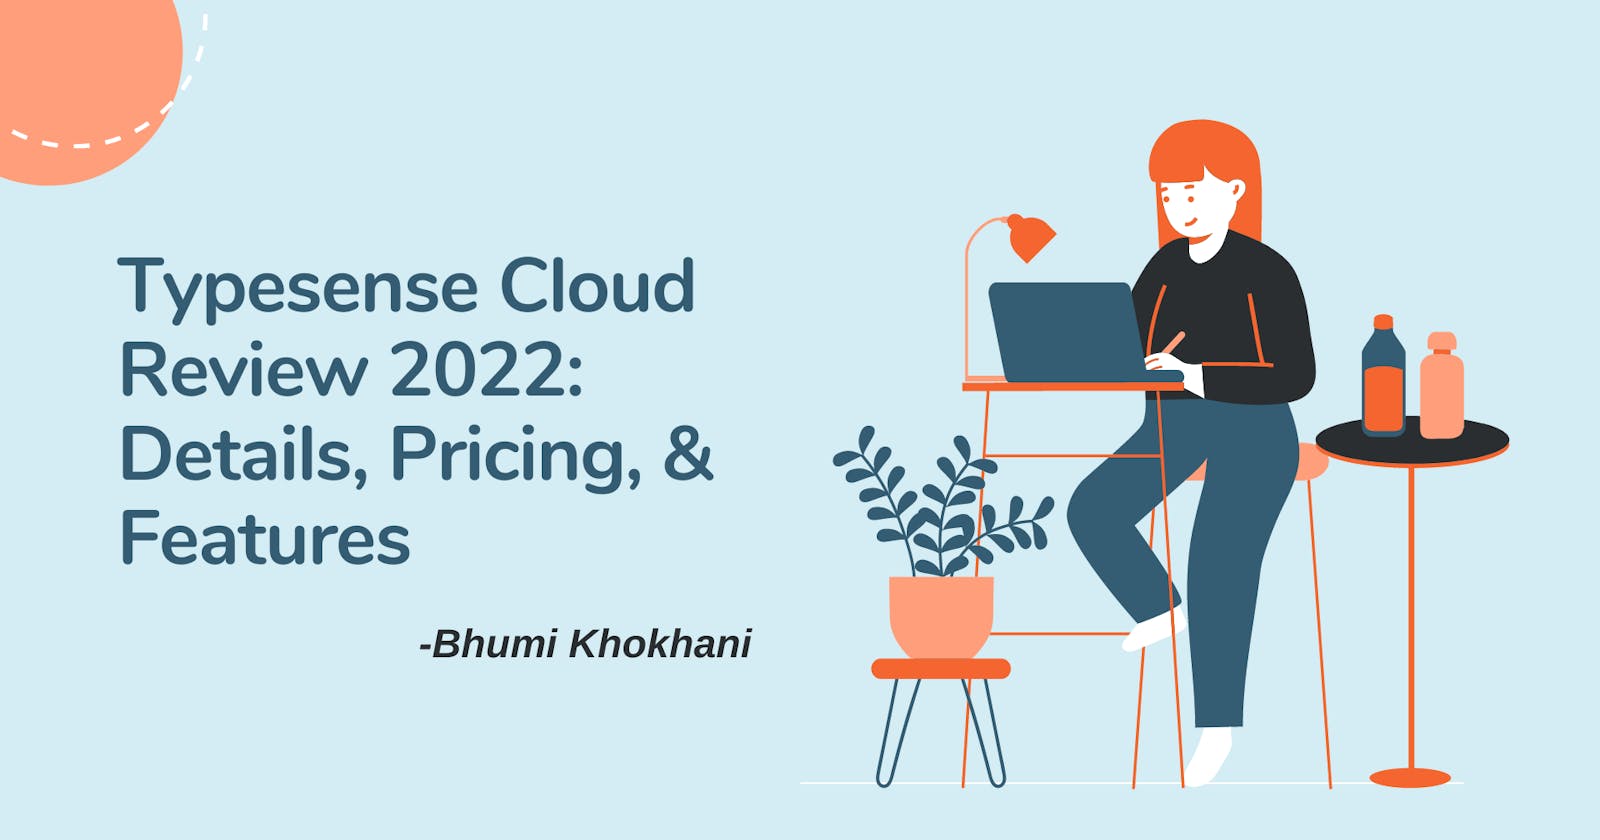 Typesense Cloud Review 2022: Details, Pricing, & Features